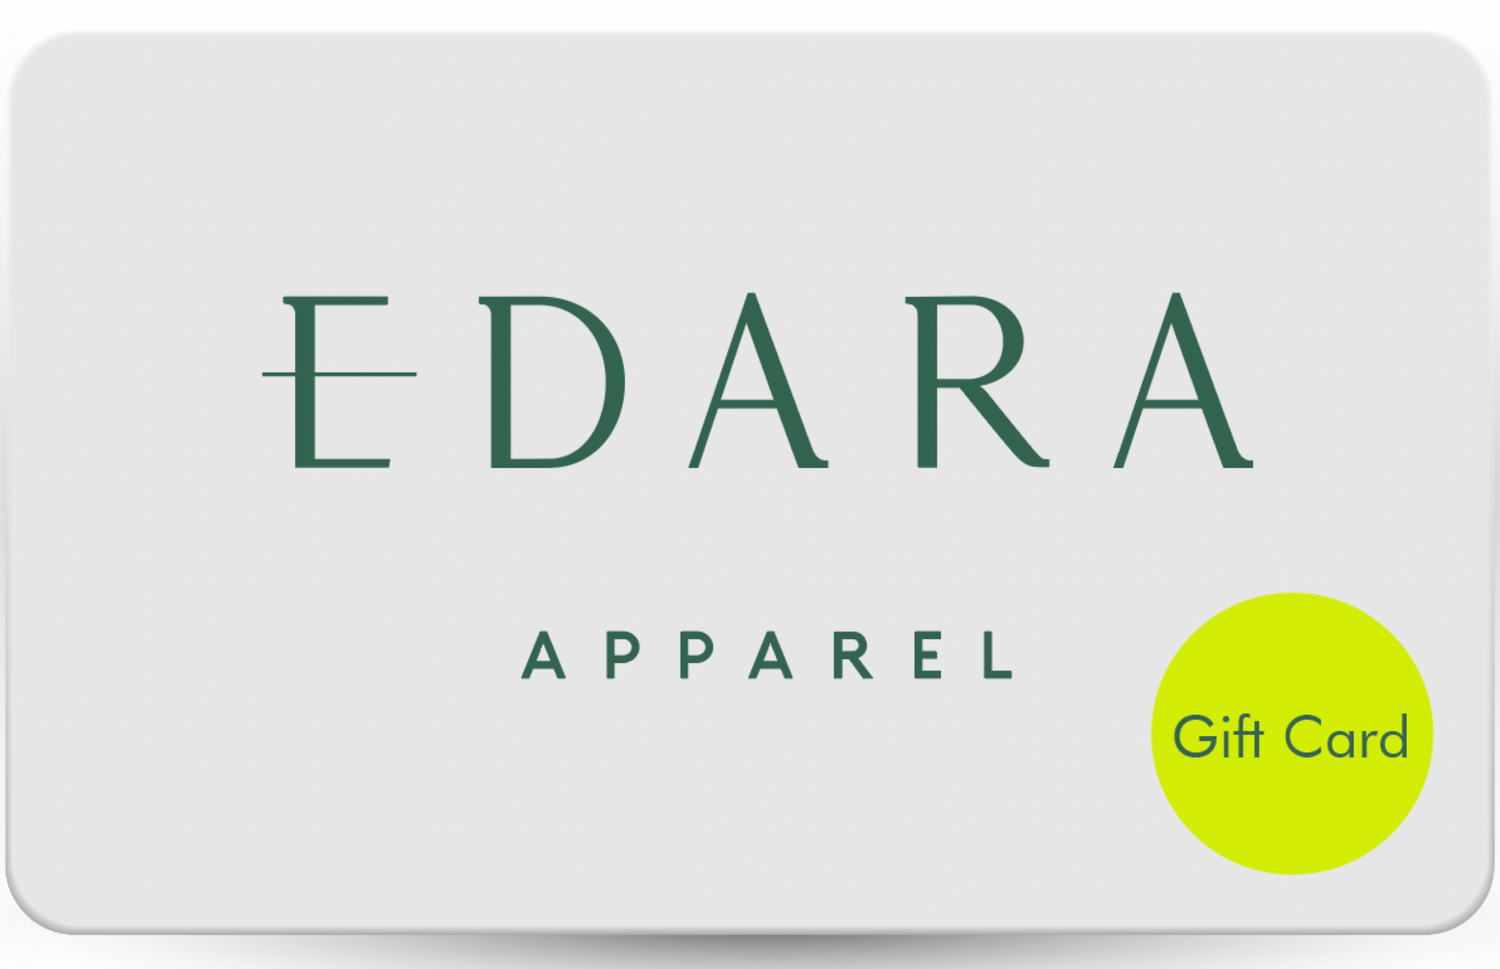 Gift cards in varying amounts are available at Edara Apparel for your tennis and pickleball friends.